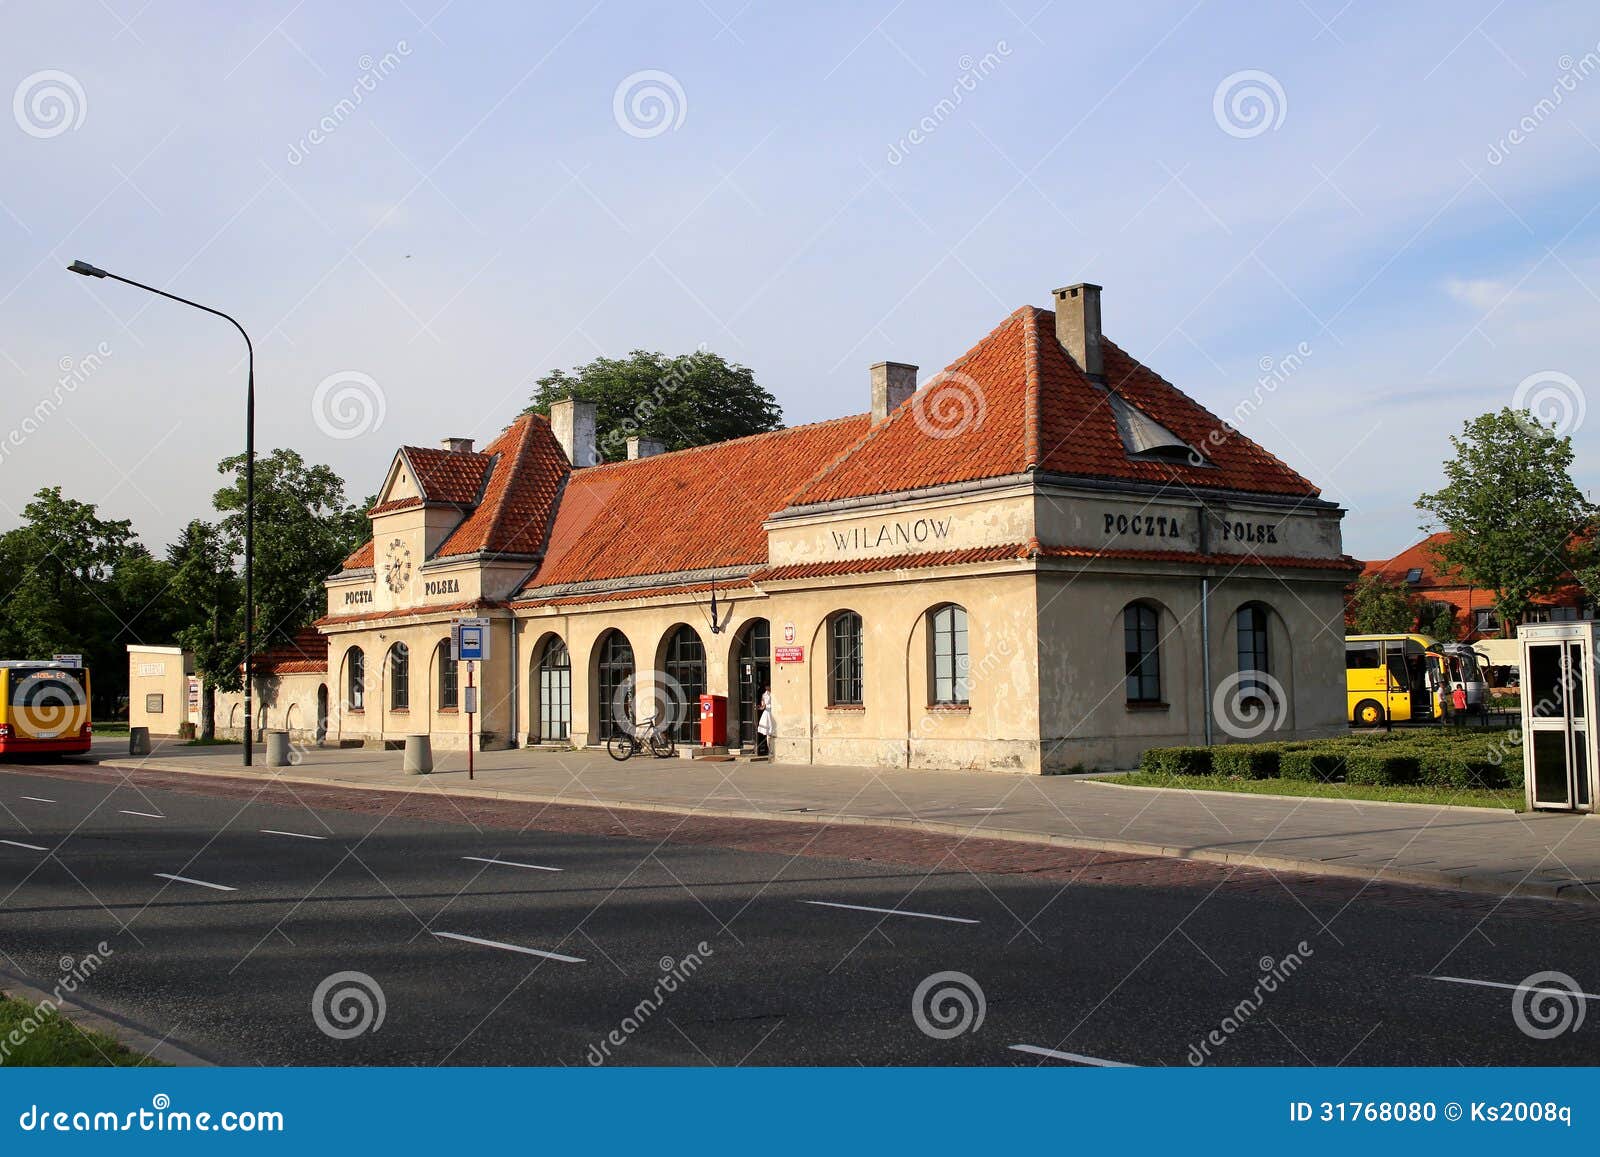 Warsaw The Old Post Office Building Editorial Image Image Of